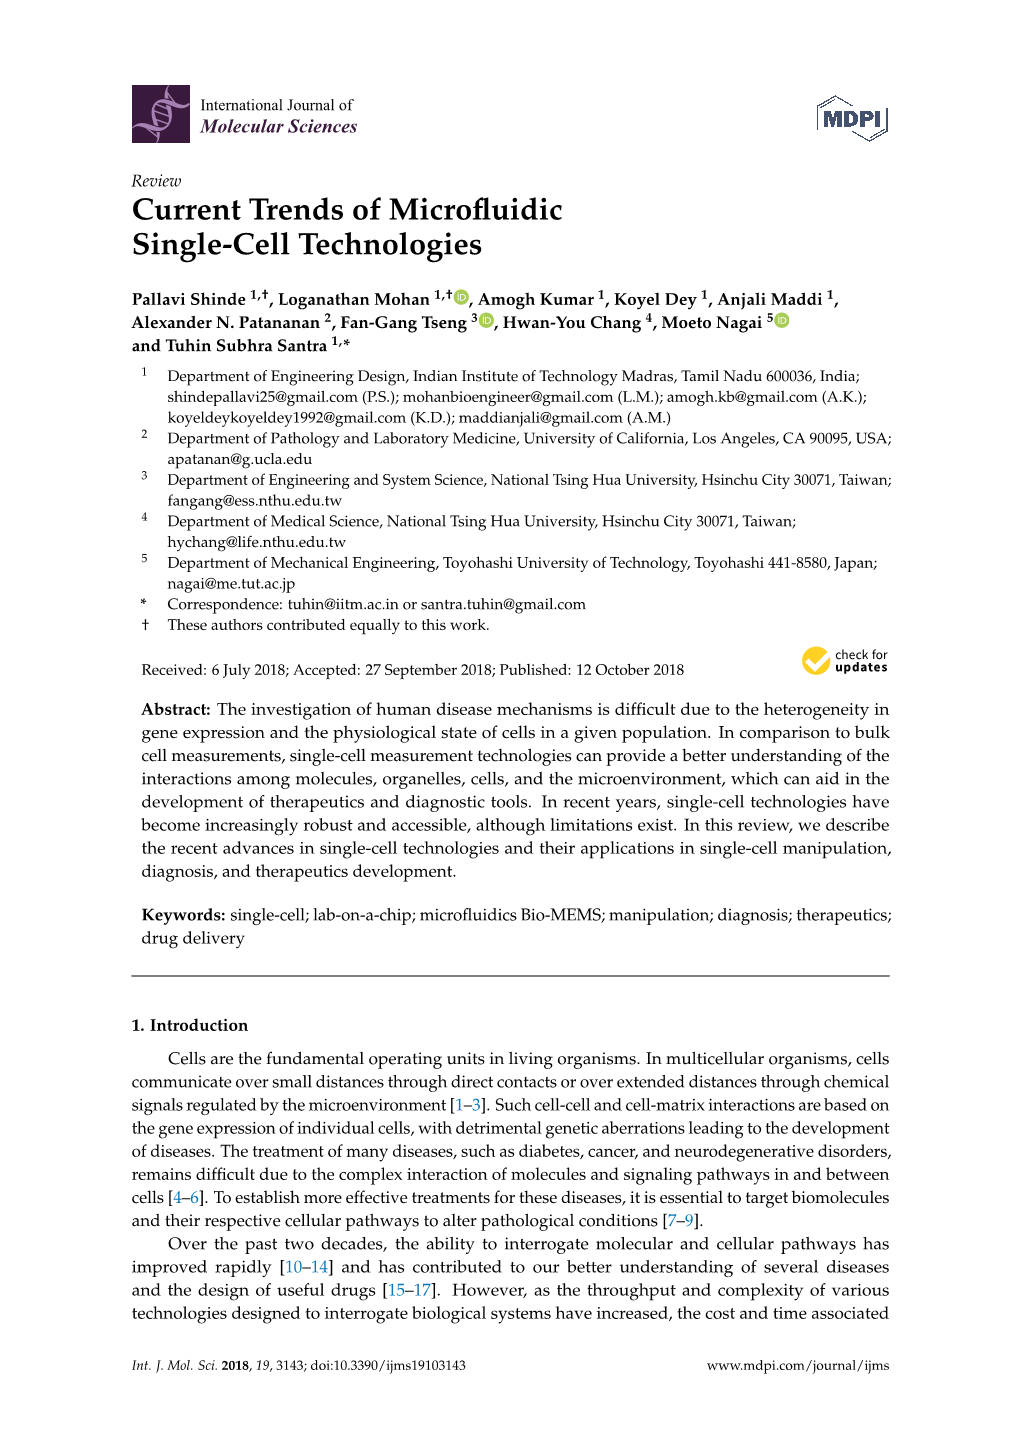 Current Trends of Microfluidic Single-Cell Technologies